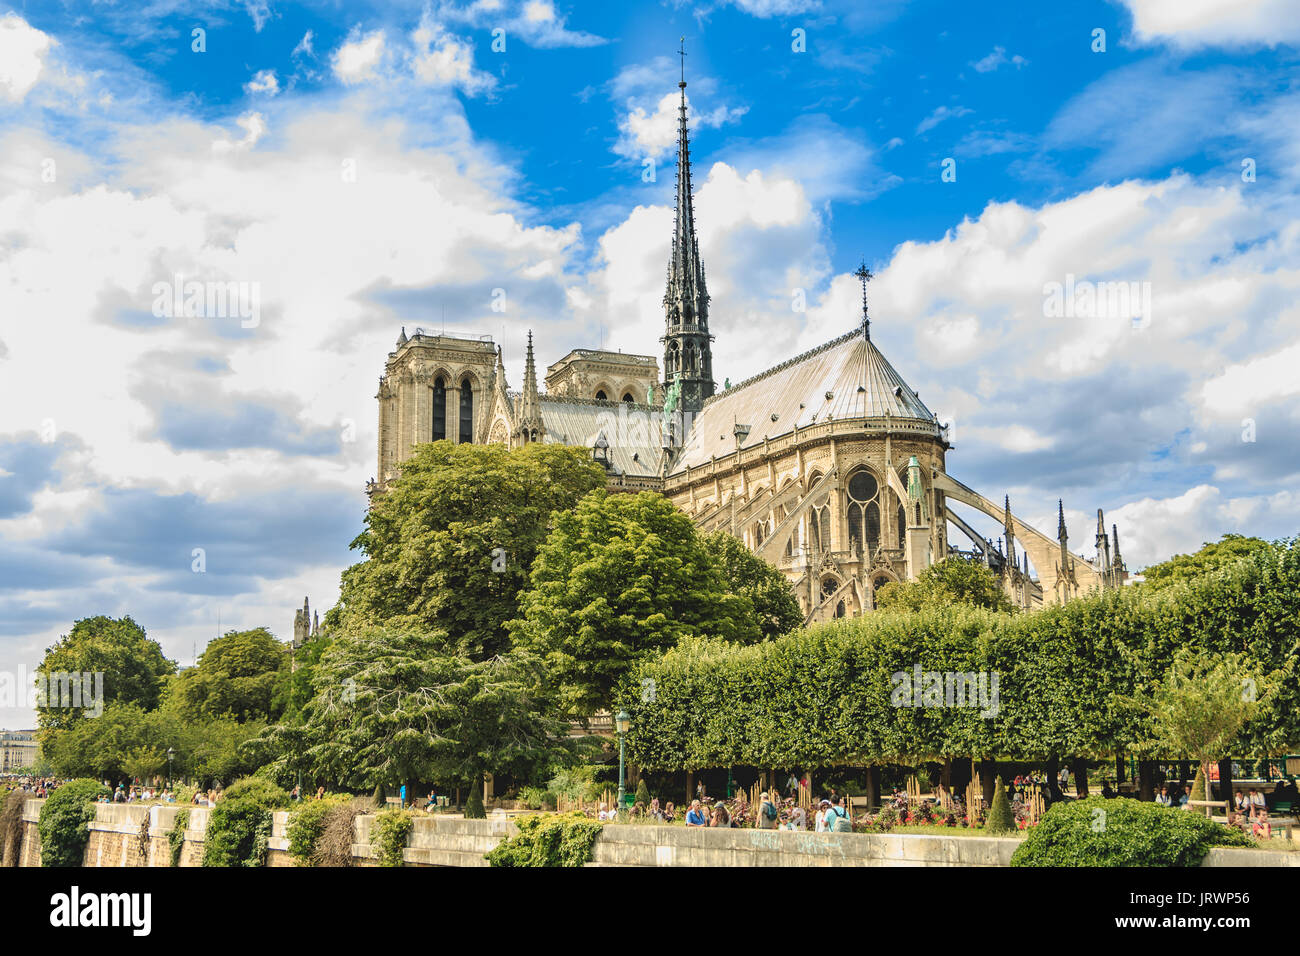 Paris, FRANCE - july 11, 2017: Wide shot of Notre-Dame cathedral in Paris, France with its gardens and tourists visiting the French capital Stock Photo